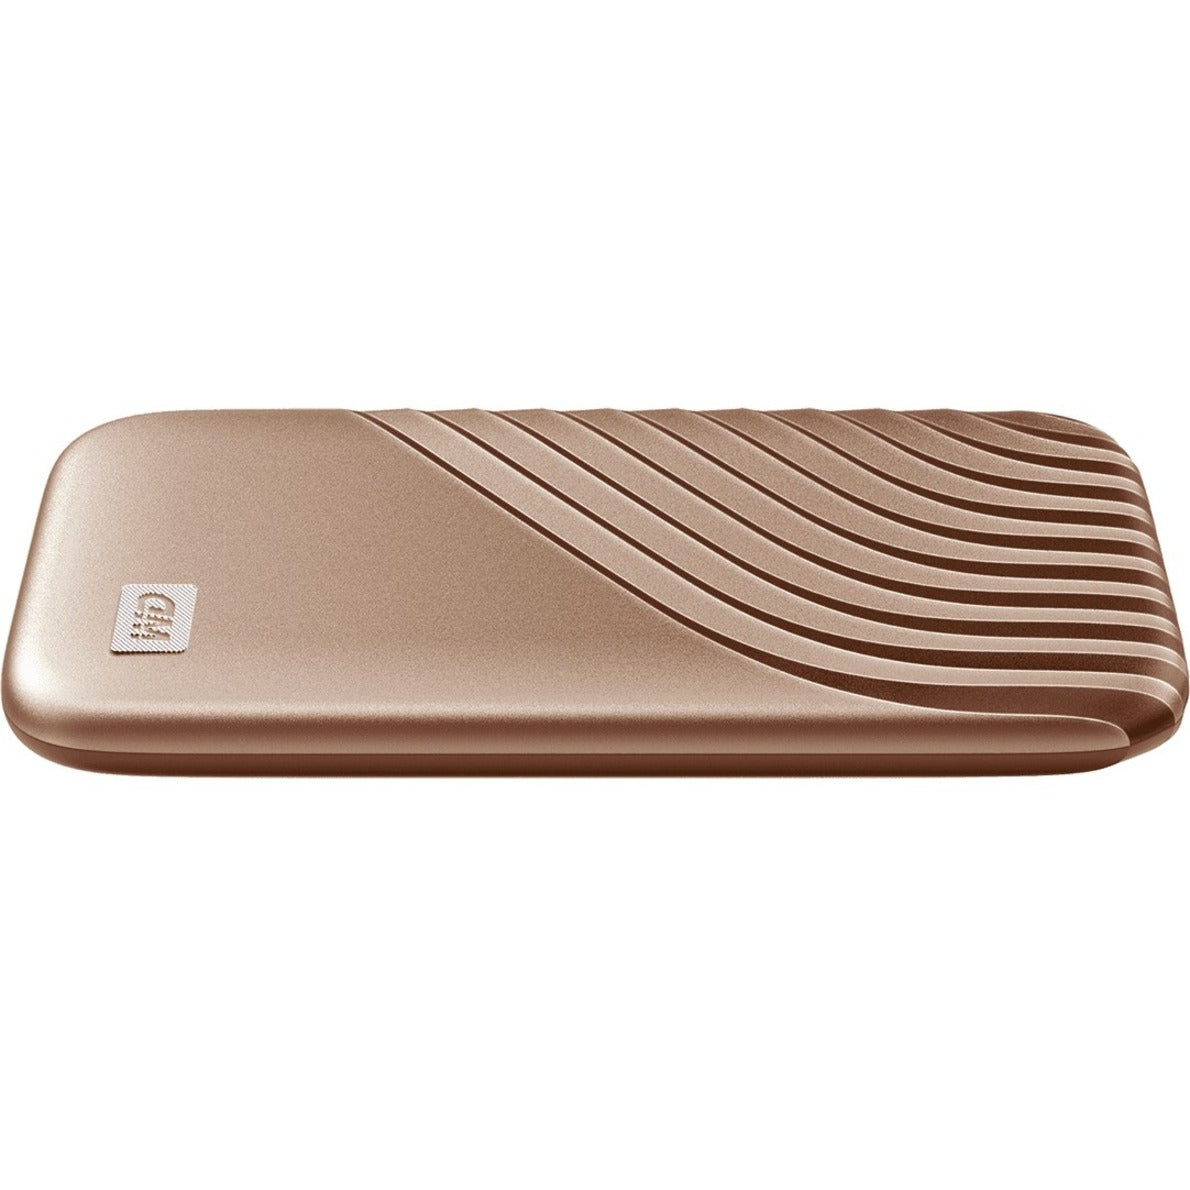 WD My Passport WDBAGF0010BGD-WESN 1 TB Portable Solid State Drive - External - Gold